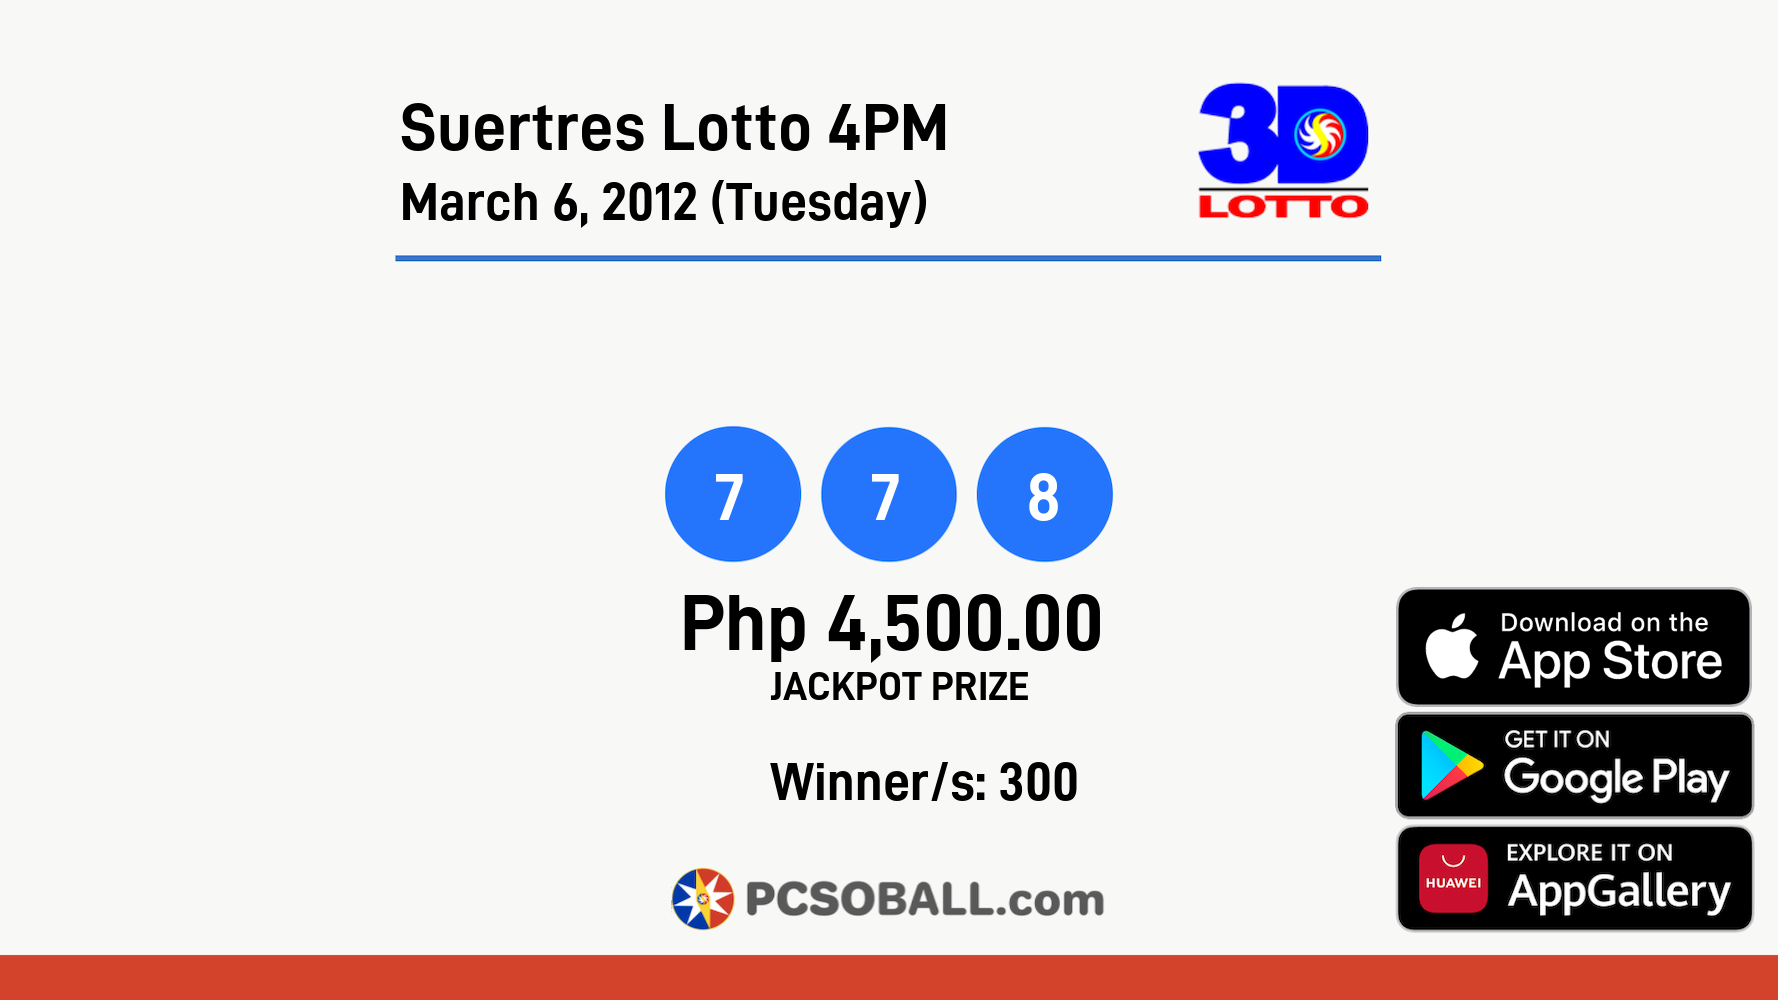 Suertres Lotto 4PM March 6, 2012 (Tuesday) Result